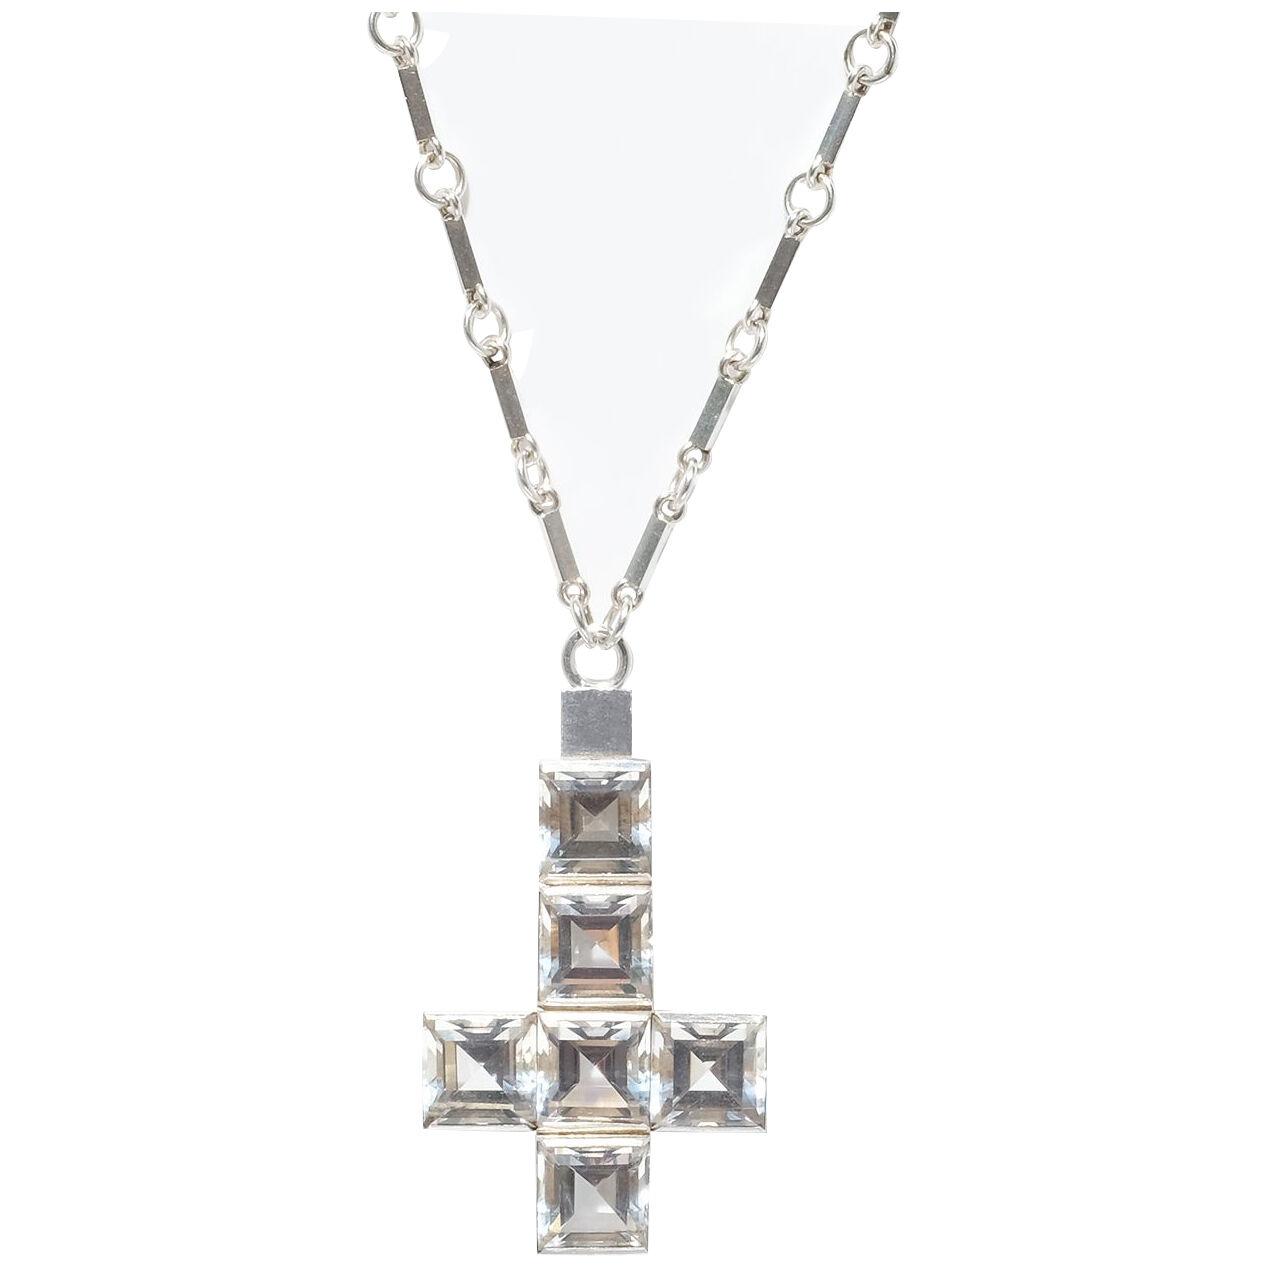 Silver Necklace with a Rock Crystal Cross Pendant by Wiwen Nilsson  year 1938